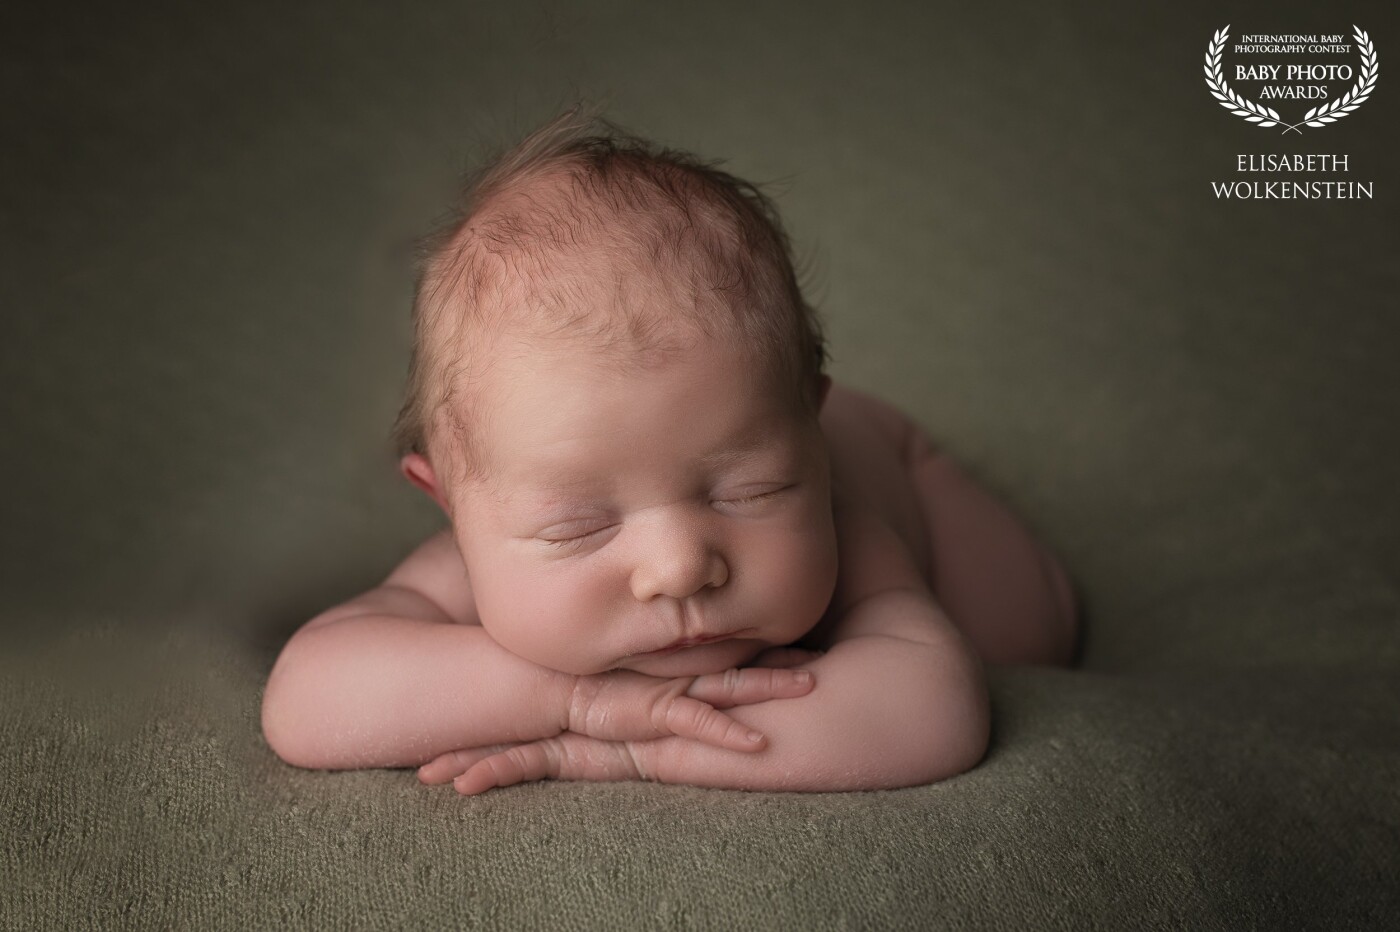 This photo was taken on the beanbag, on a fabric by Baby Photo Props (Seville, Spain).<br />
The baby was about 14 days old at the time of the picture.